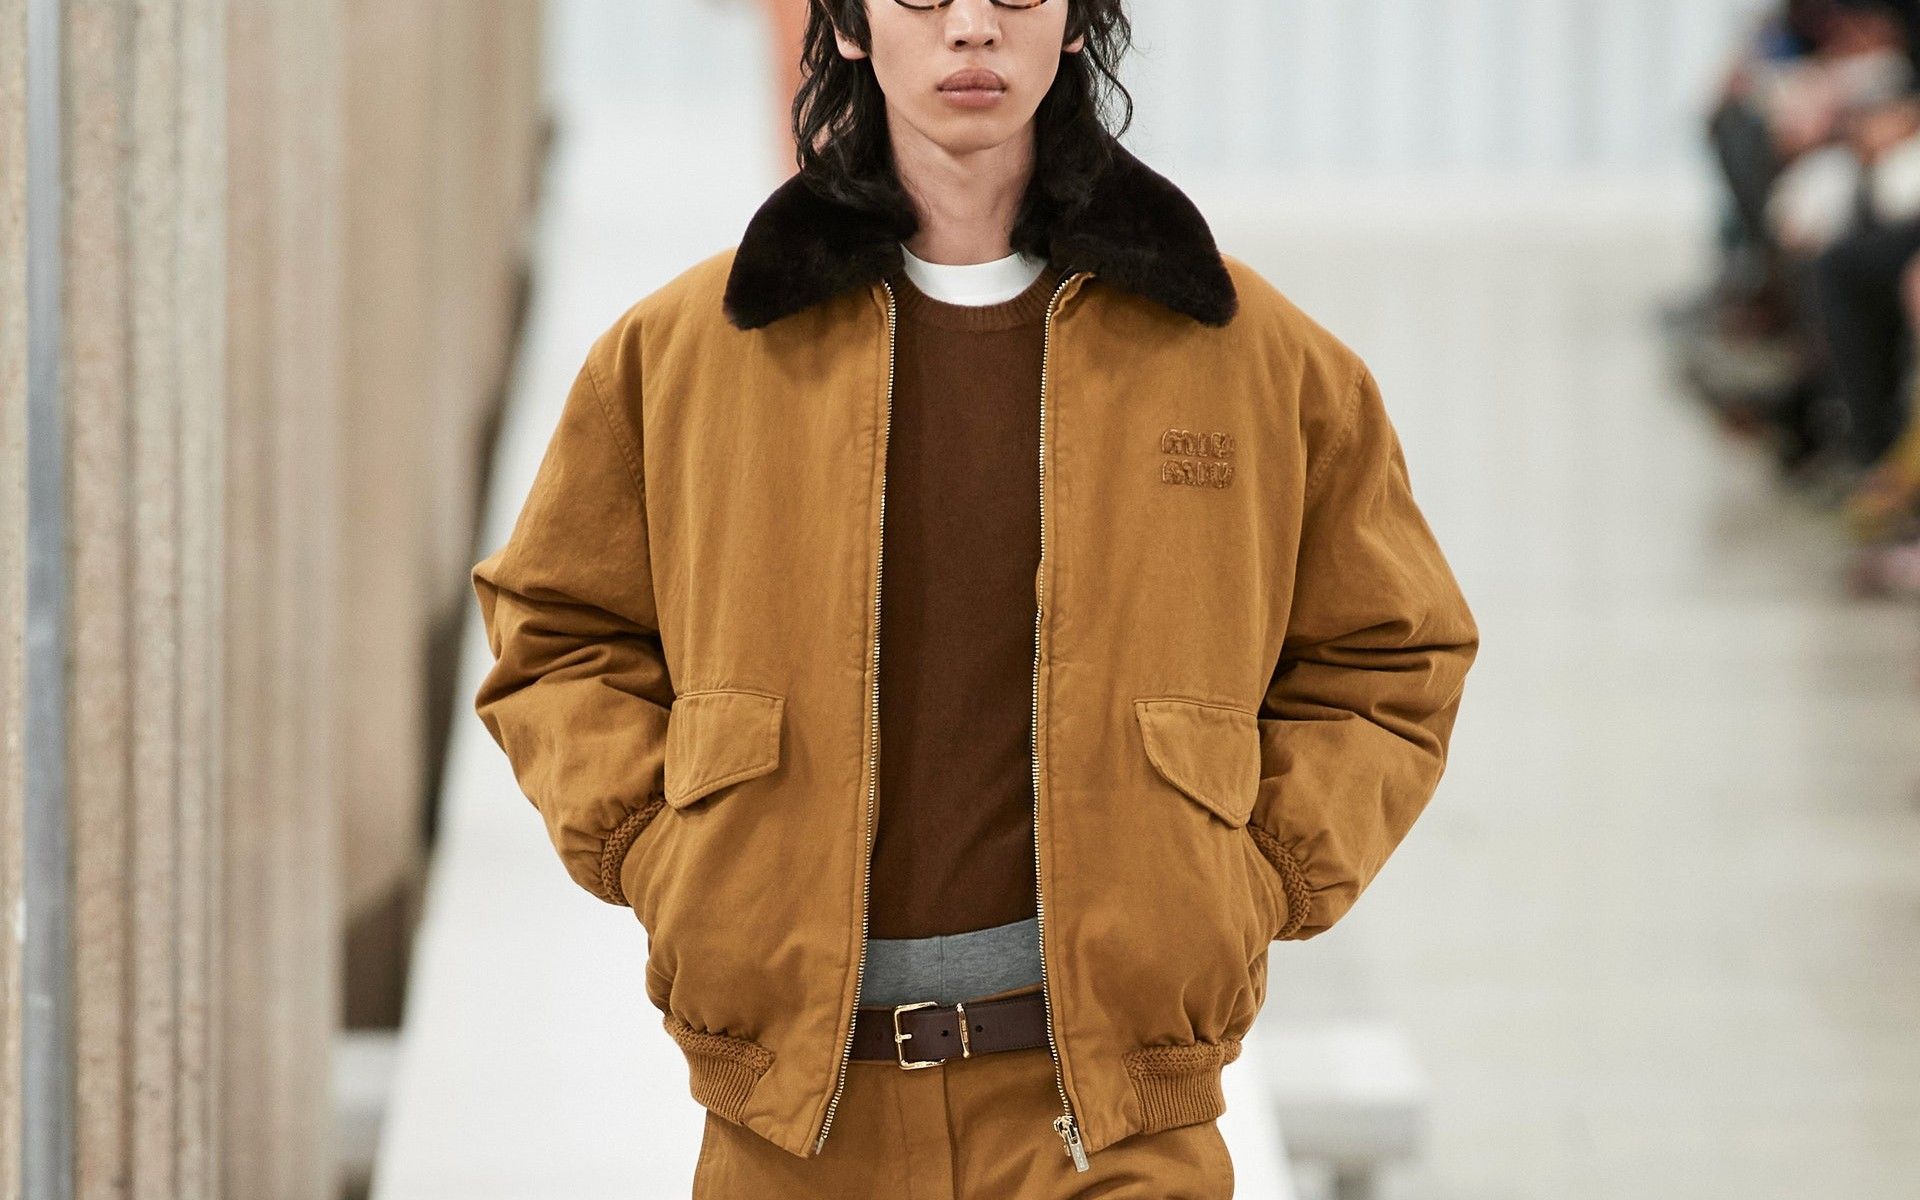 Carhartt WIP: the influence of workwear in high fashion